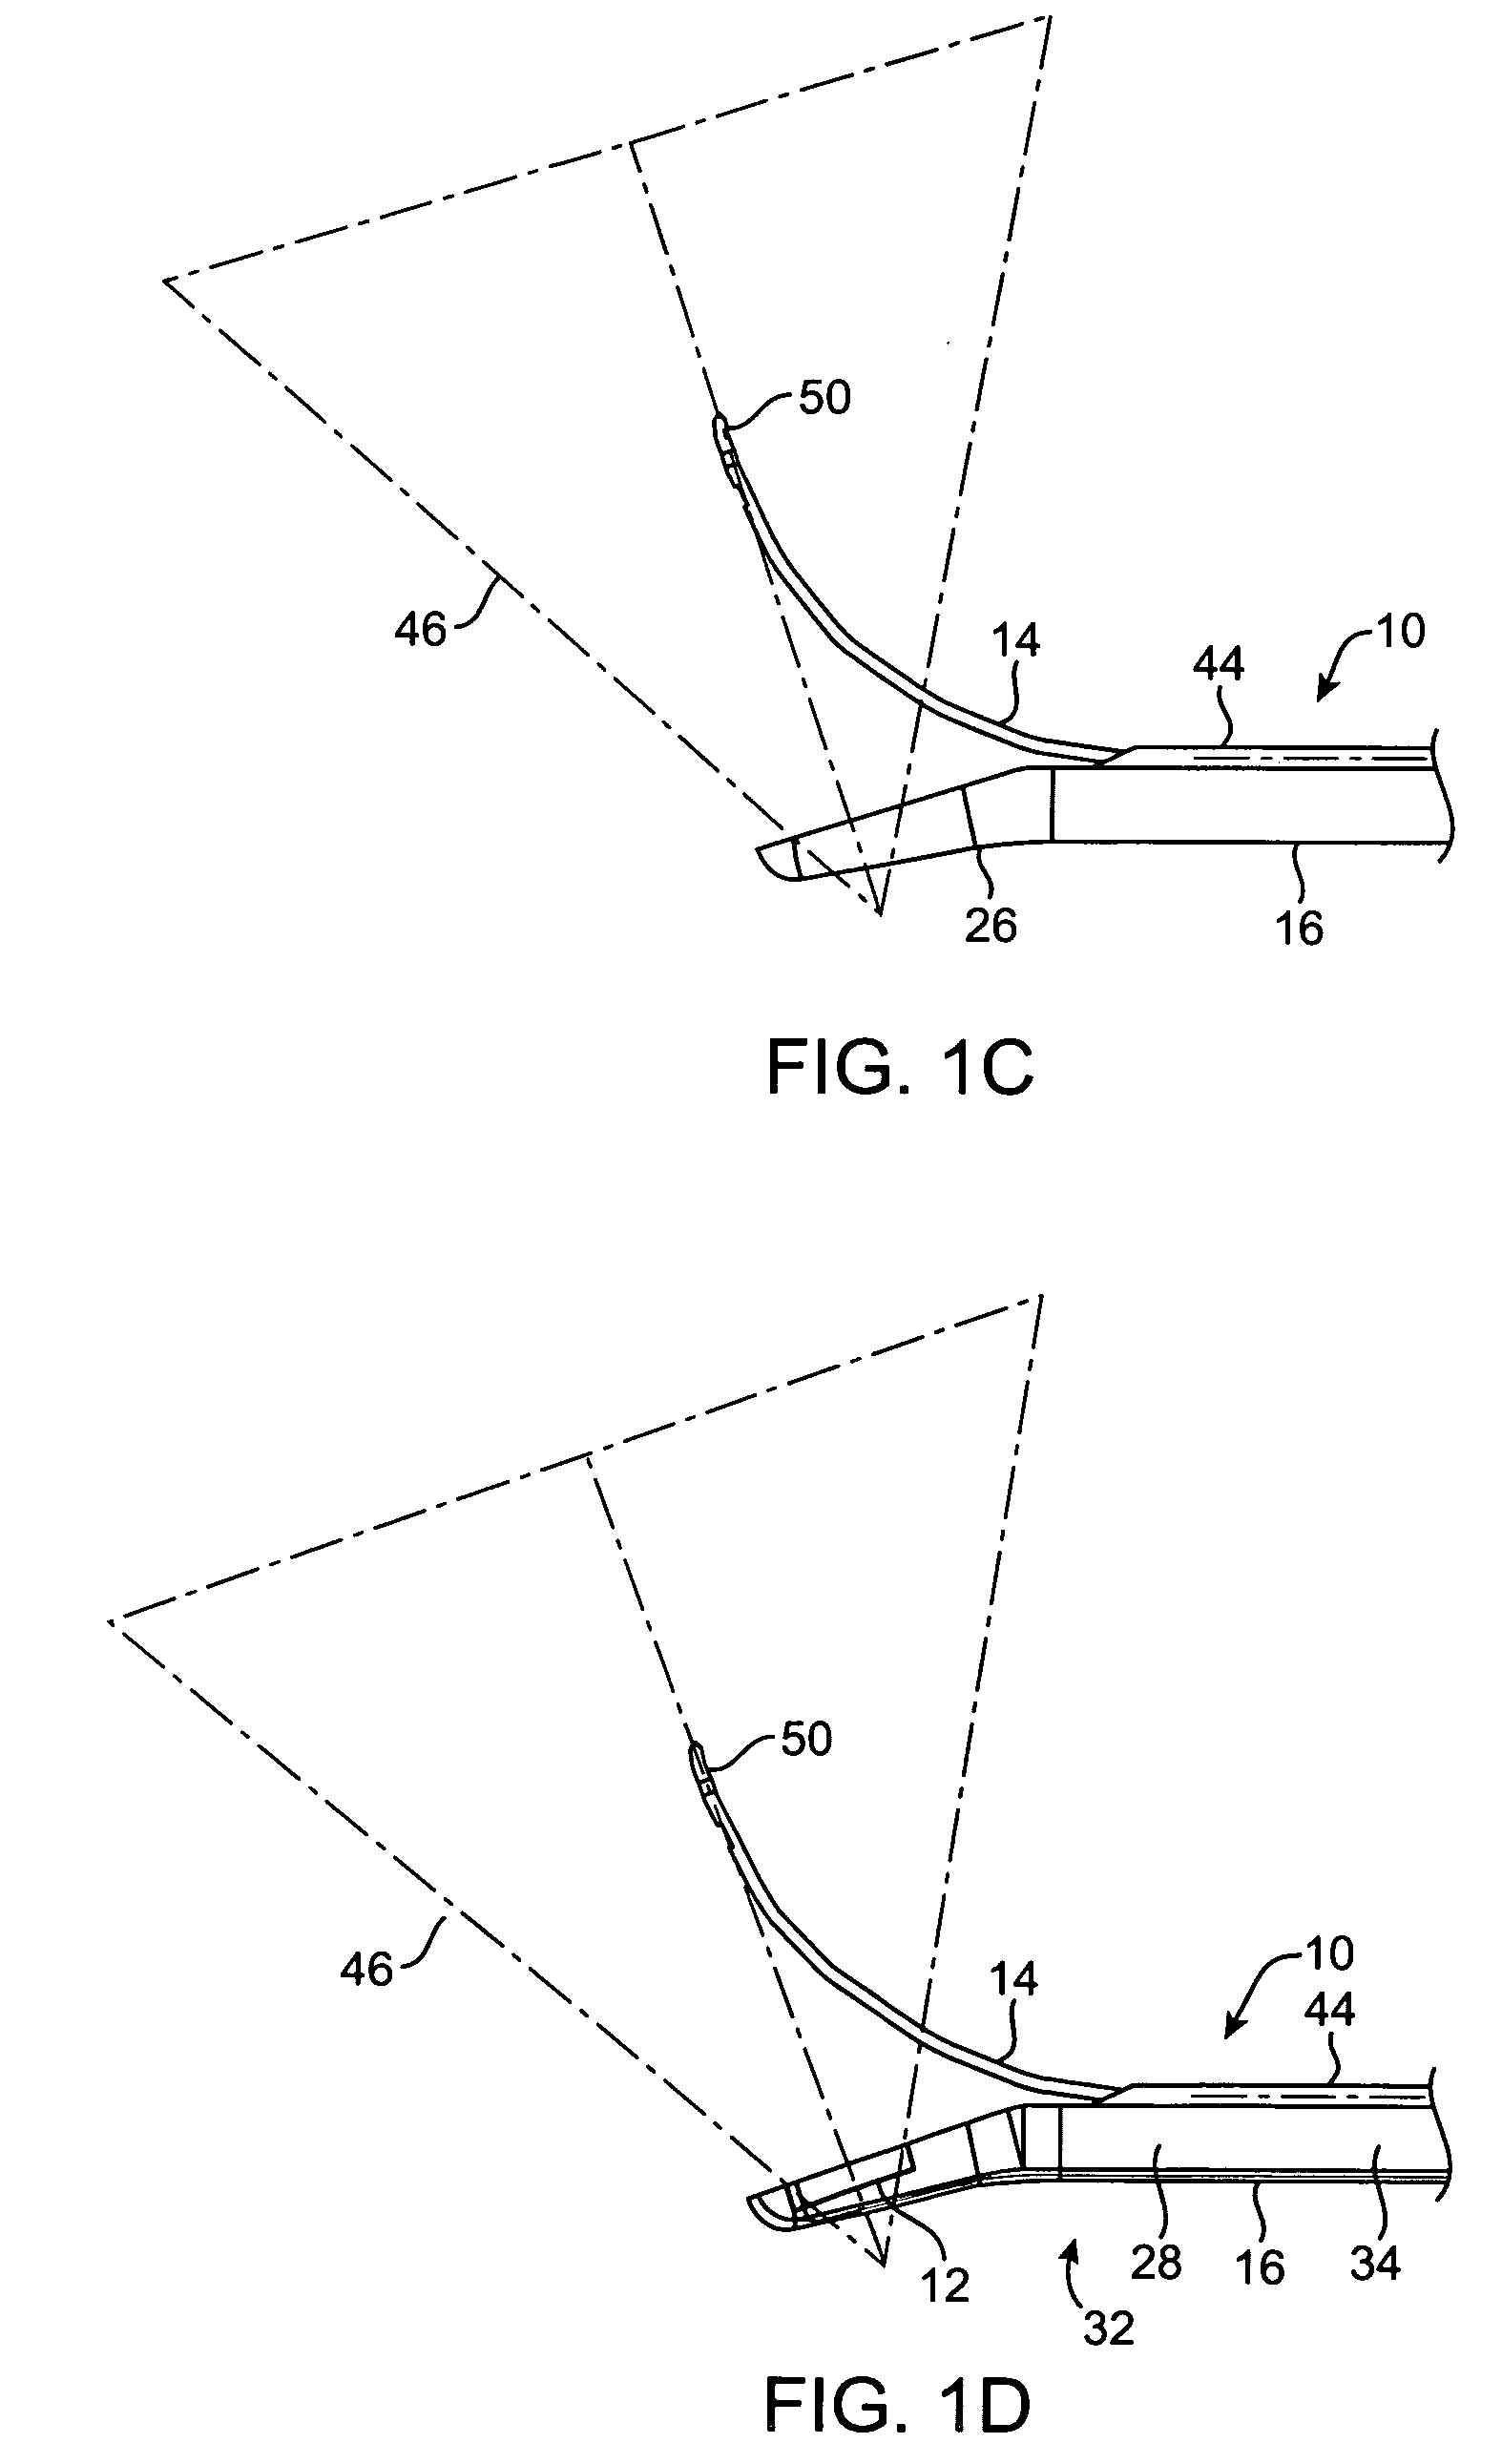 Systems and methods for deploying echogenic components in ultrasonic imaging fields